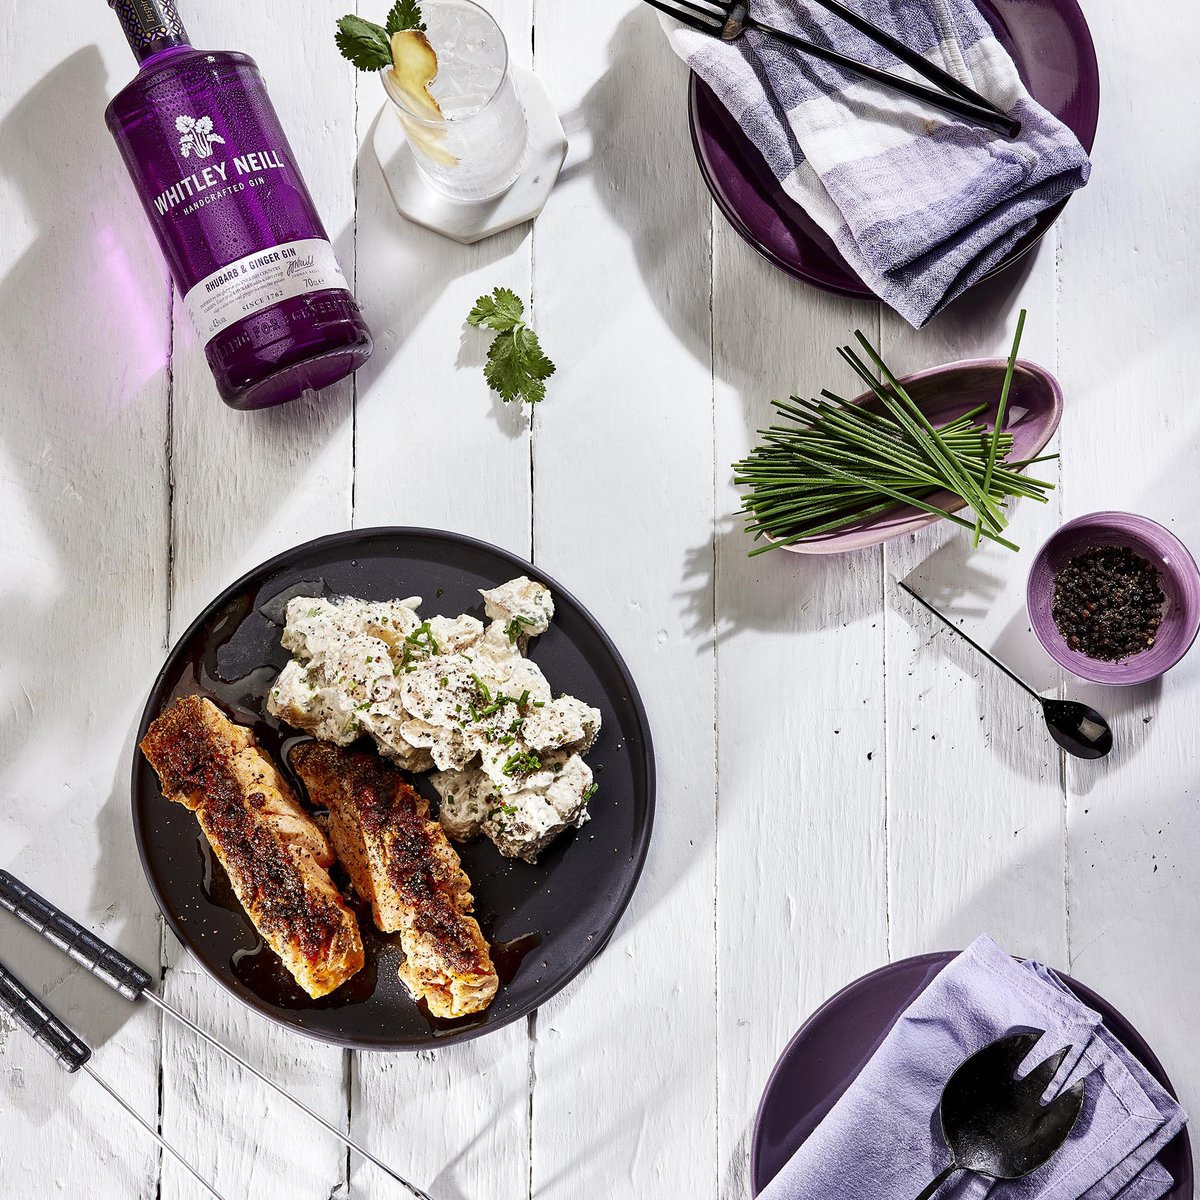 This devilled mackerel and horseradish potato salad paired with a simple, ice-cold Whitley Neill Rhubarb & Ginger Gin is a match made in heaven. 👌 Char on the grill and the naturally oily fish will produce a wonderful smoky aroma, ideal for pairing with our gin!